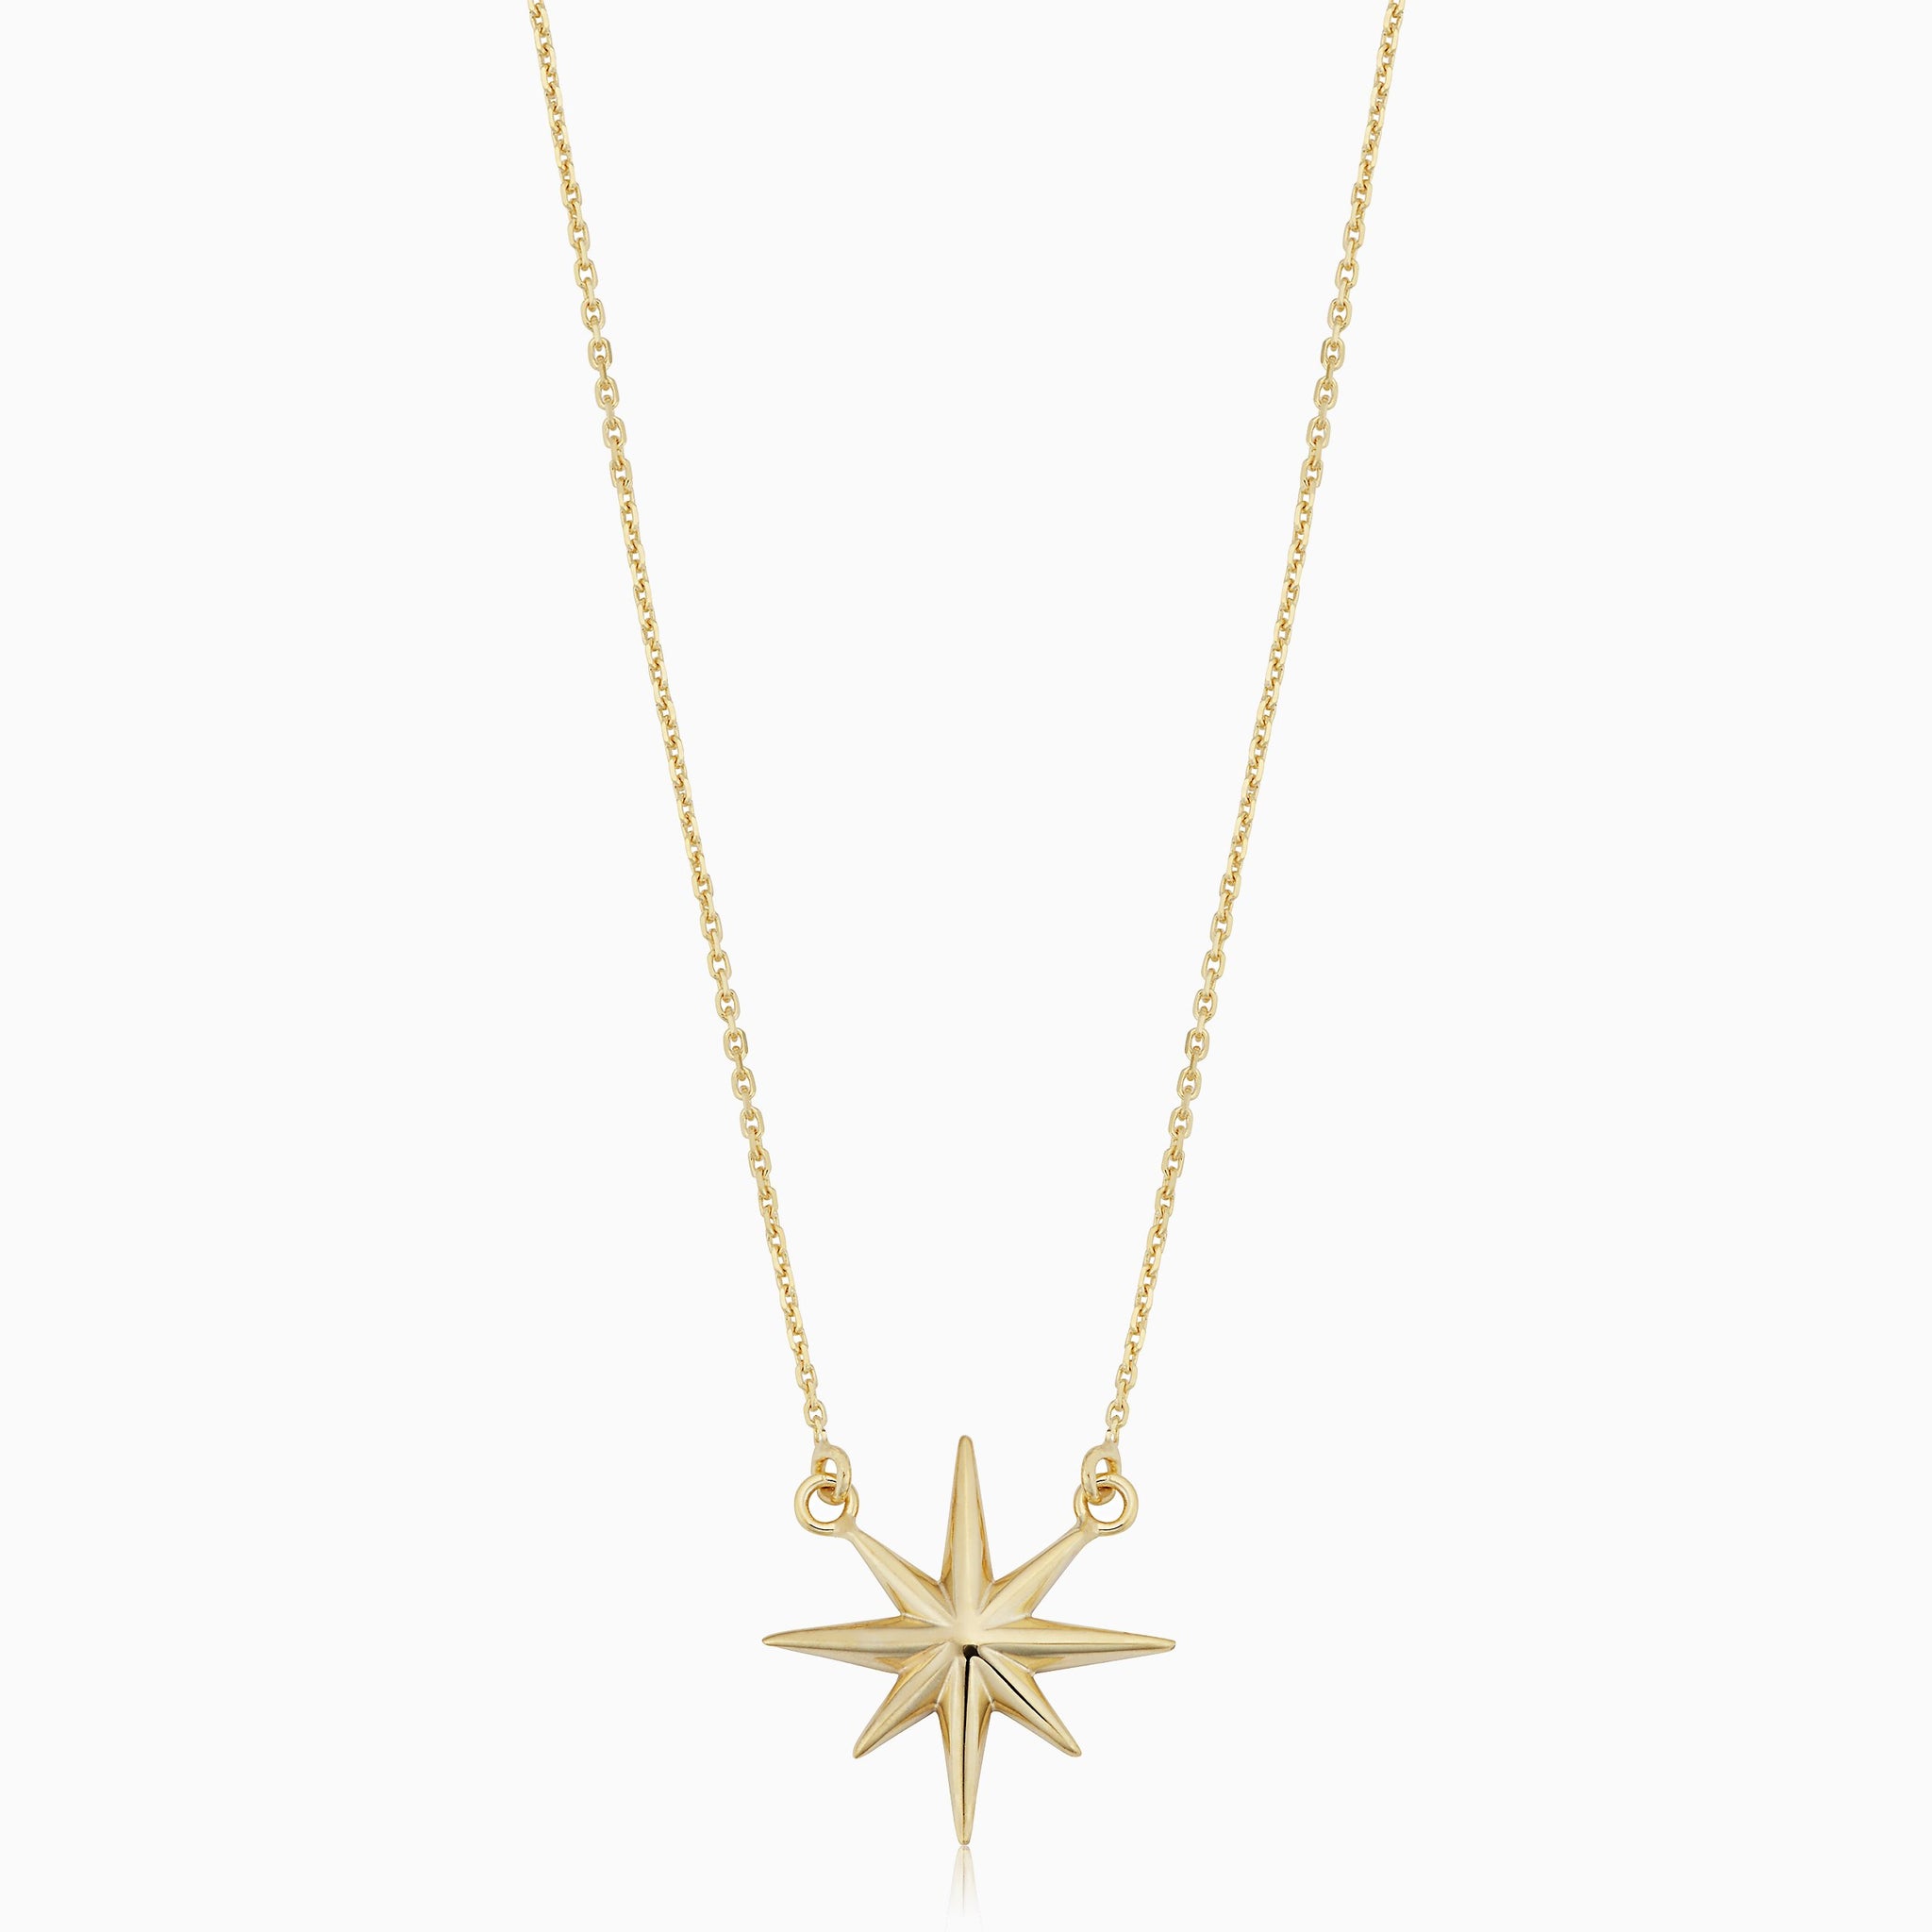 Co-exist - North Star Necklace on Gemstone - Noush Jewelry